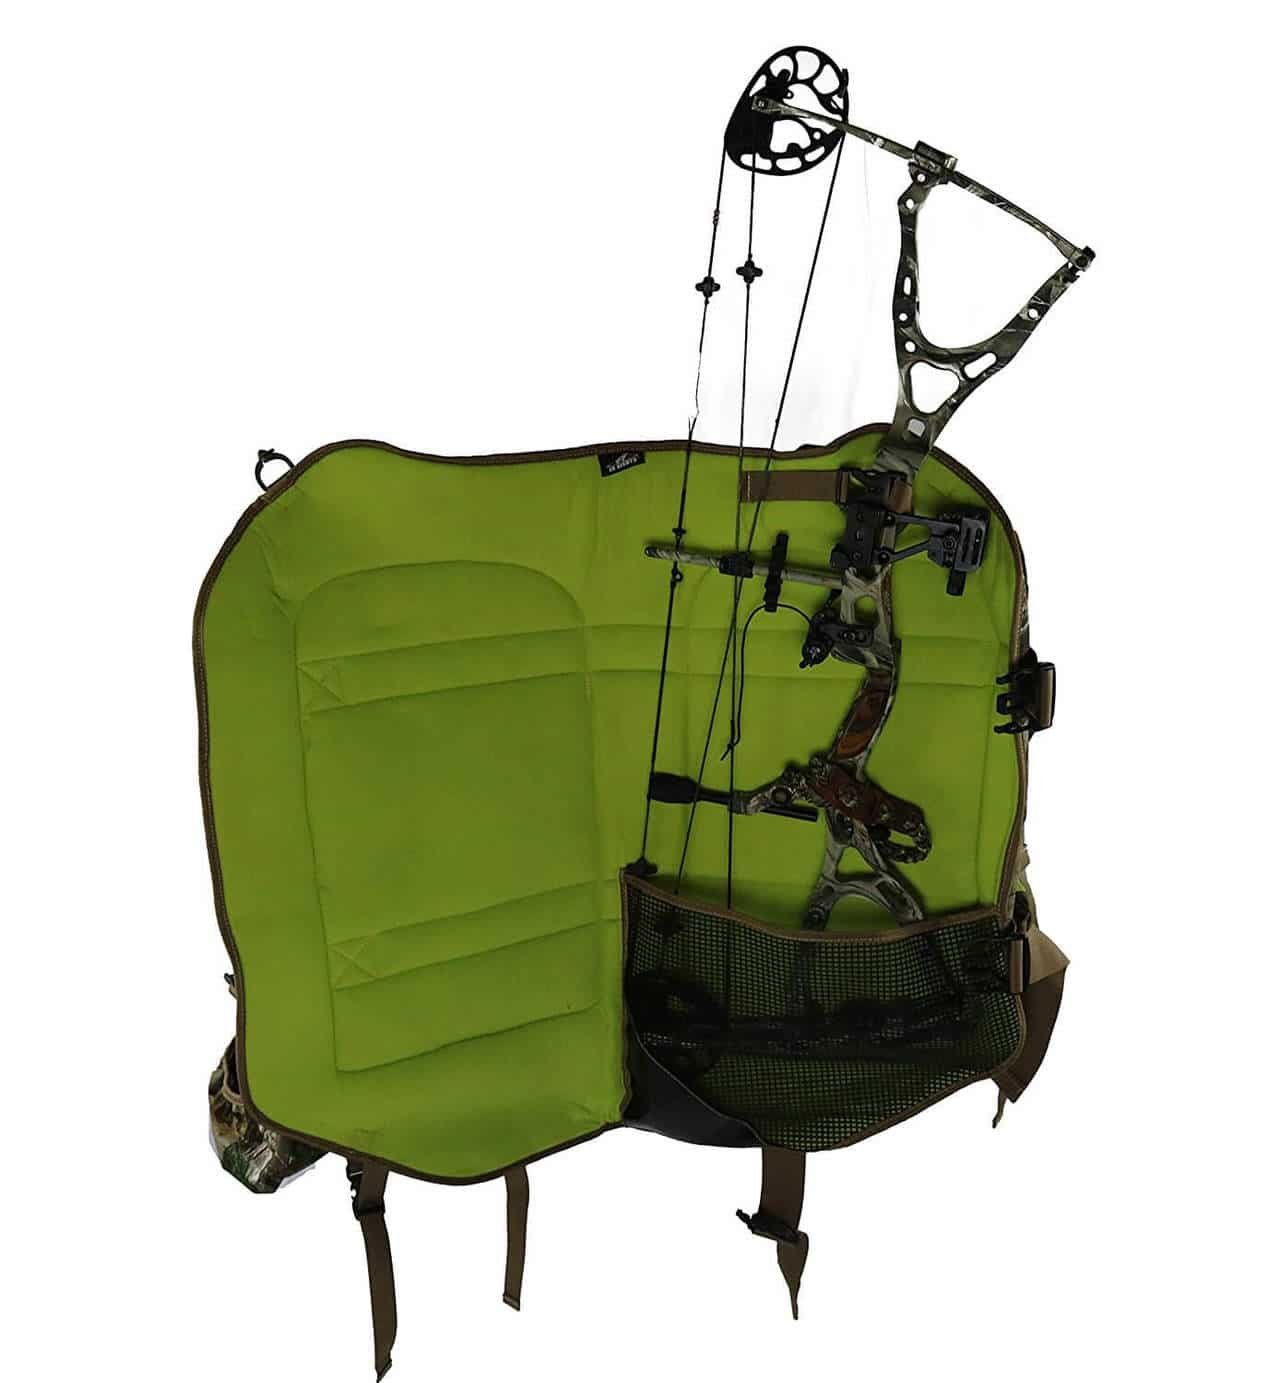 Best Bow Hunting Backpack - #4 In Sights Realtree Xtra Multi Pack - Weapon Enclosure